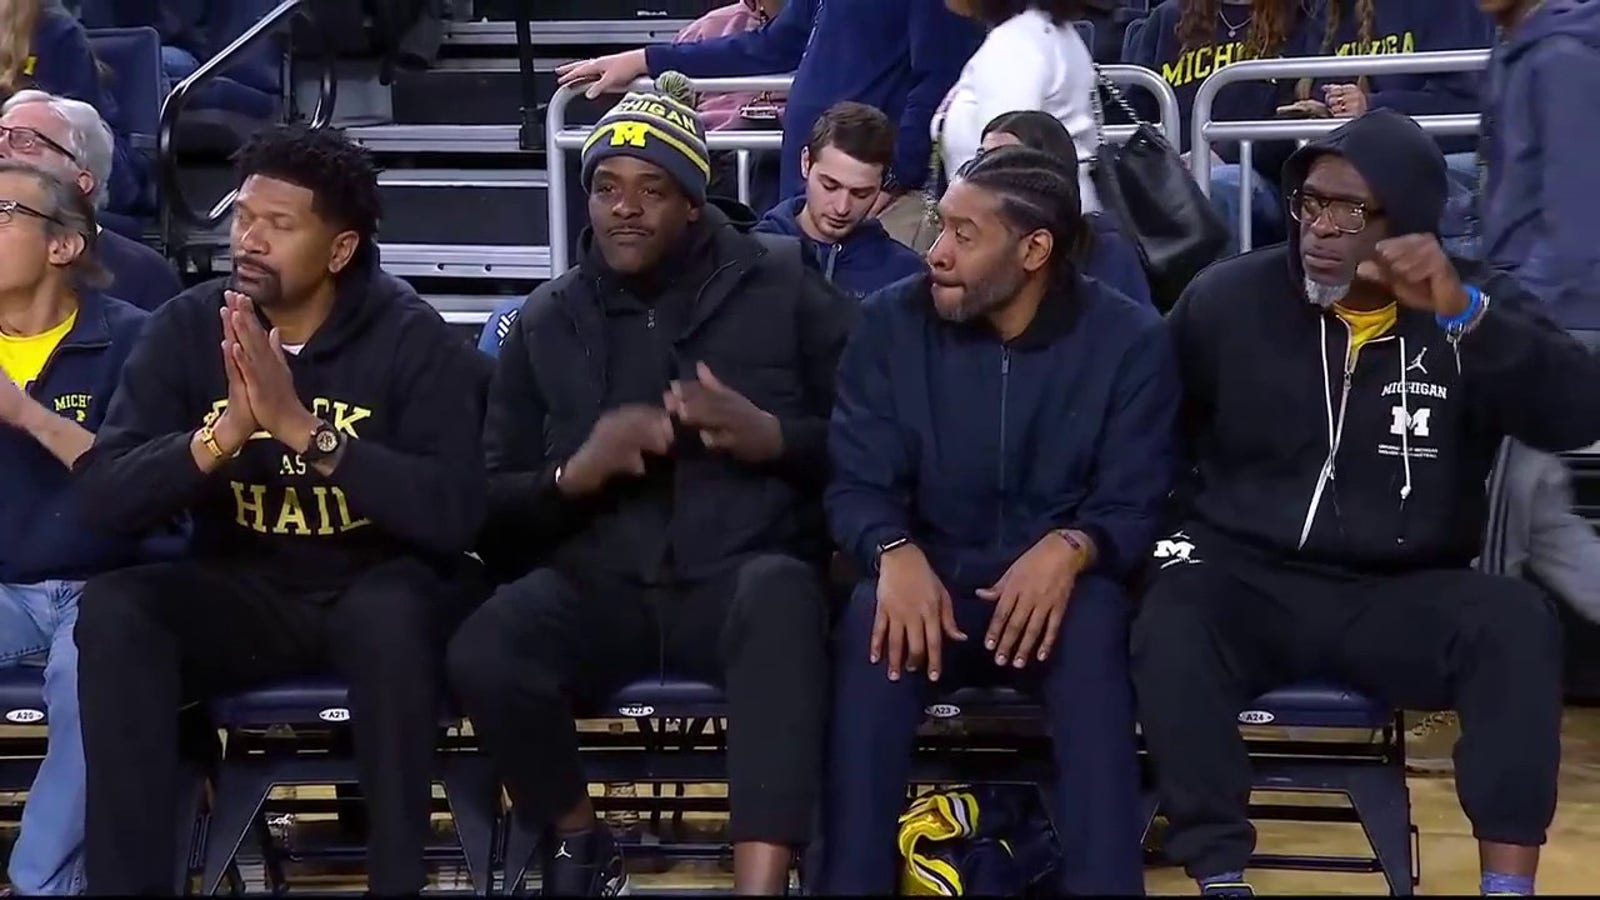 'Fab Five' reunites for first time since 1993 for Michigan's matchup with Ohio State